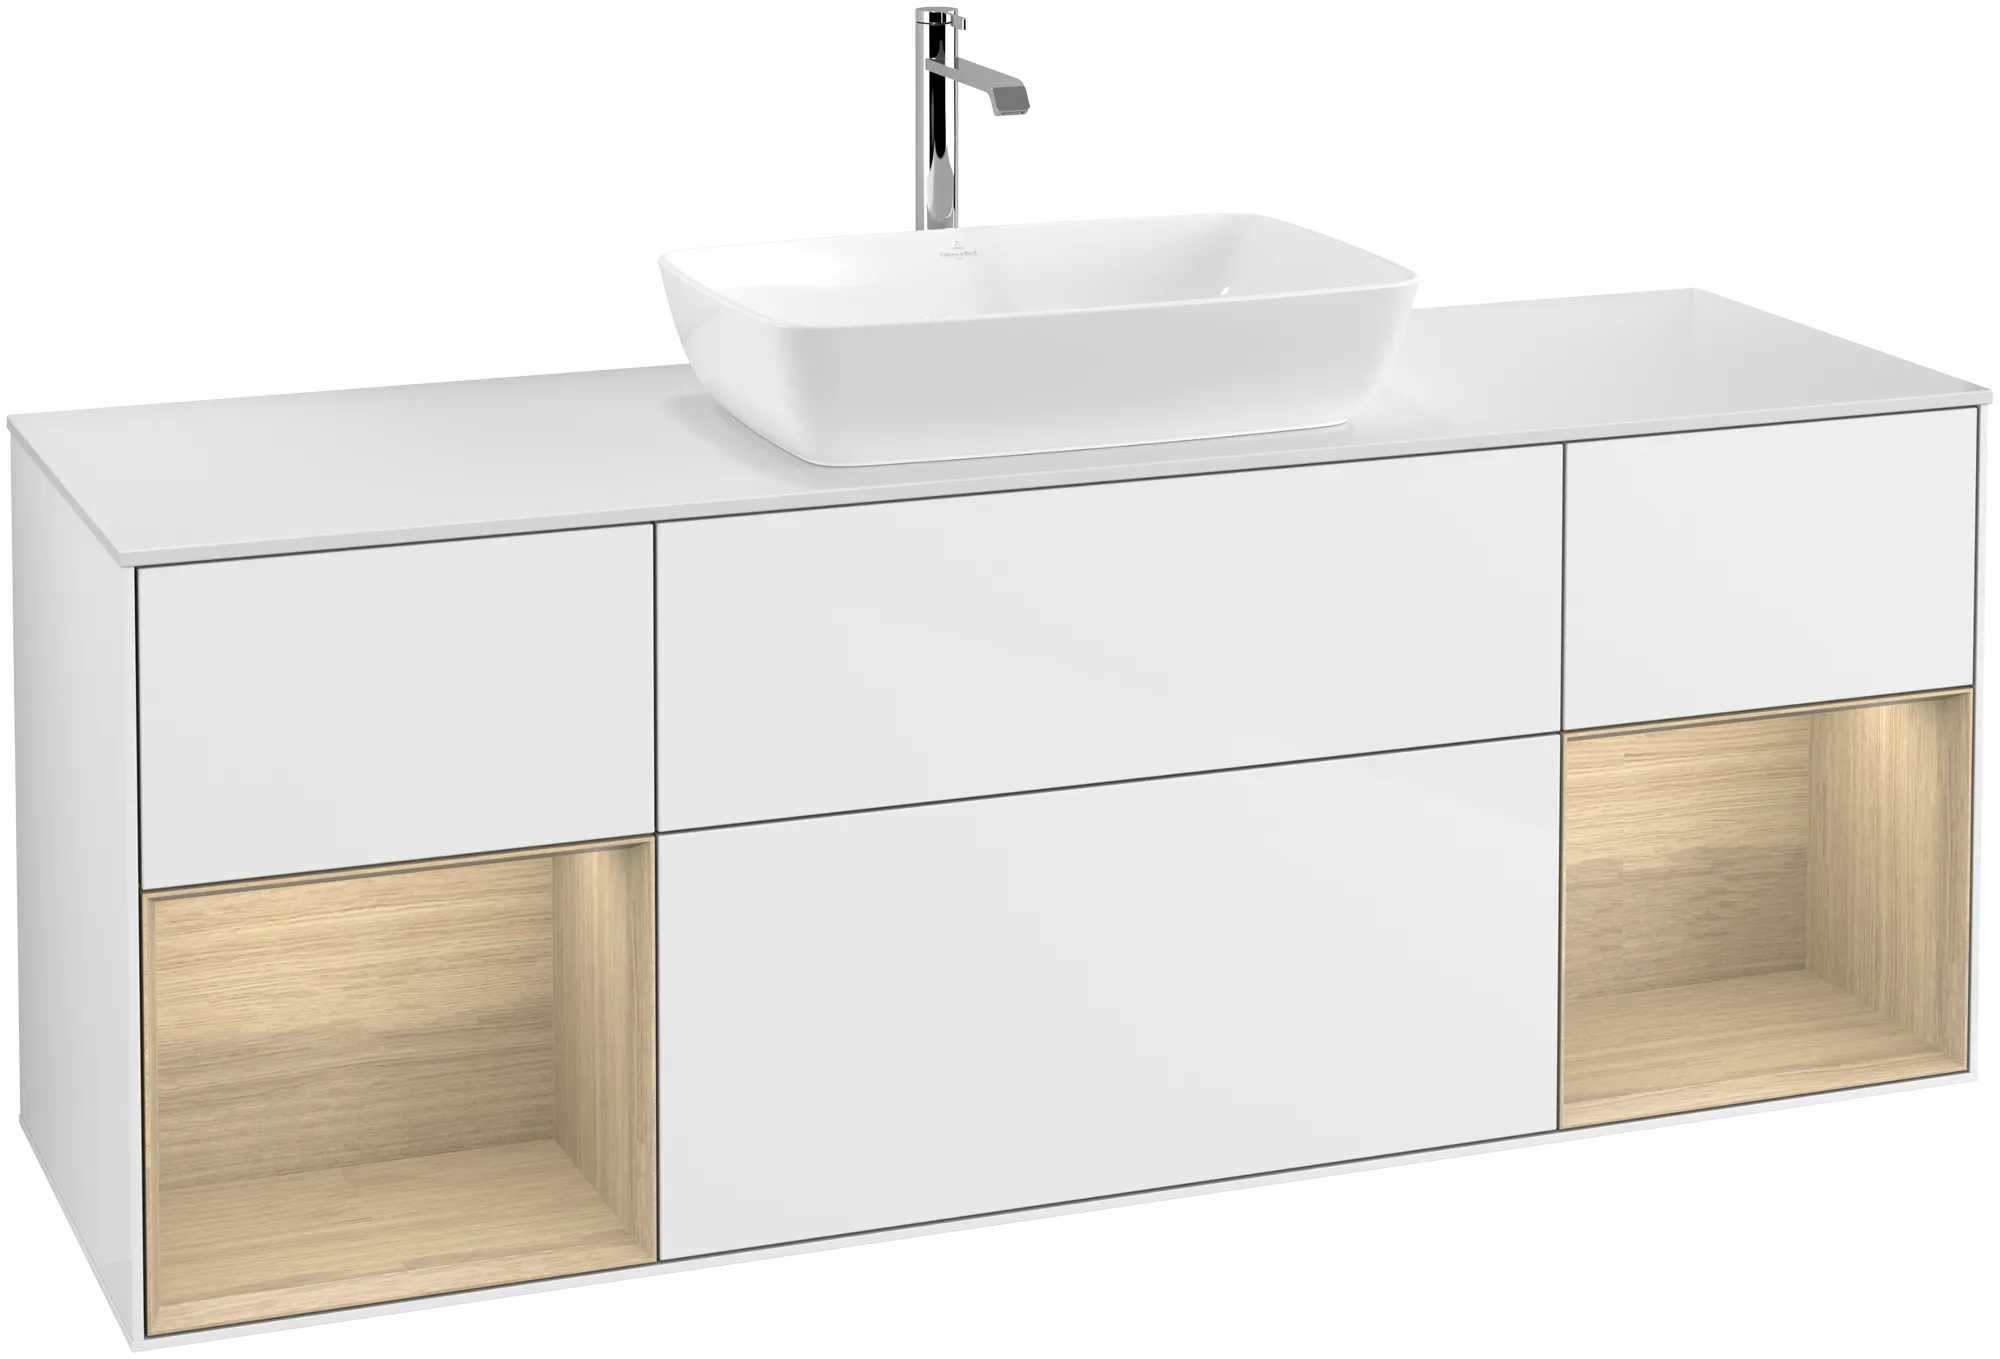 Obrázek VILLEROY BOCH Finion Vanity unit, with lighting, 4 pull-out compartments, 1600 x 603 x 501 mm, Glossy White Lacquer / Oak Veneer / Glass White Matt #G861PCGF